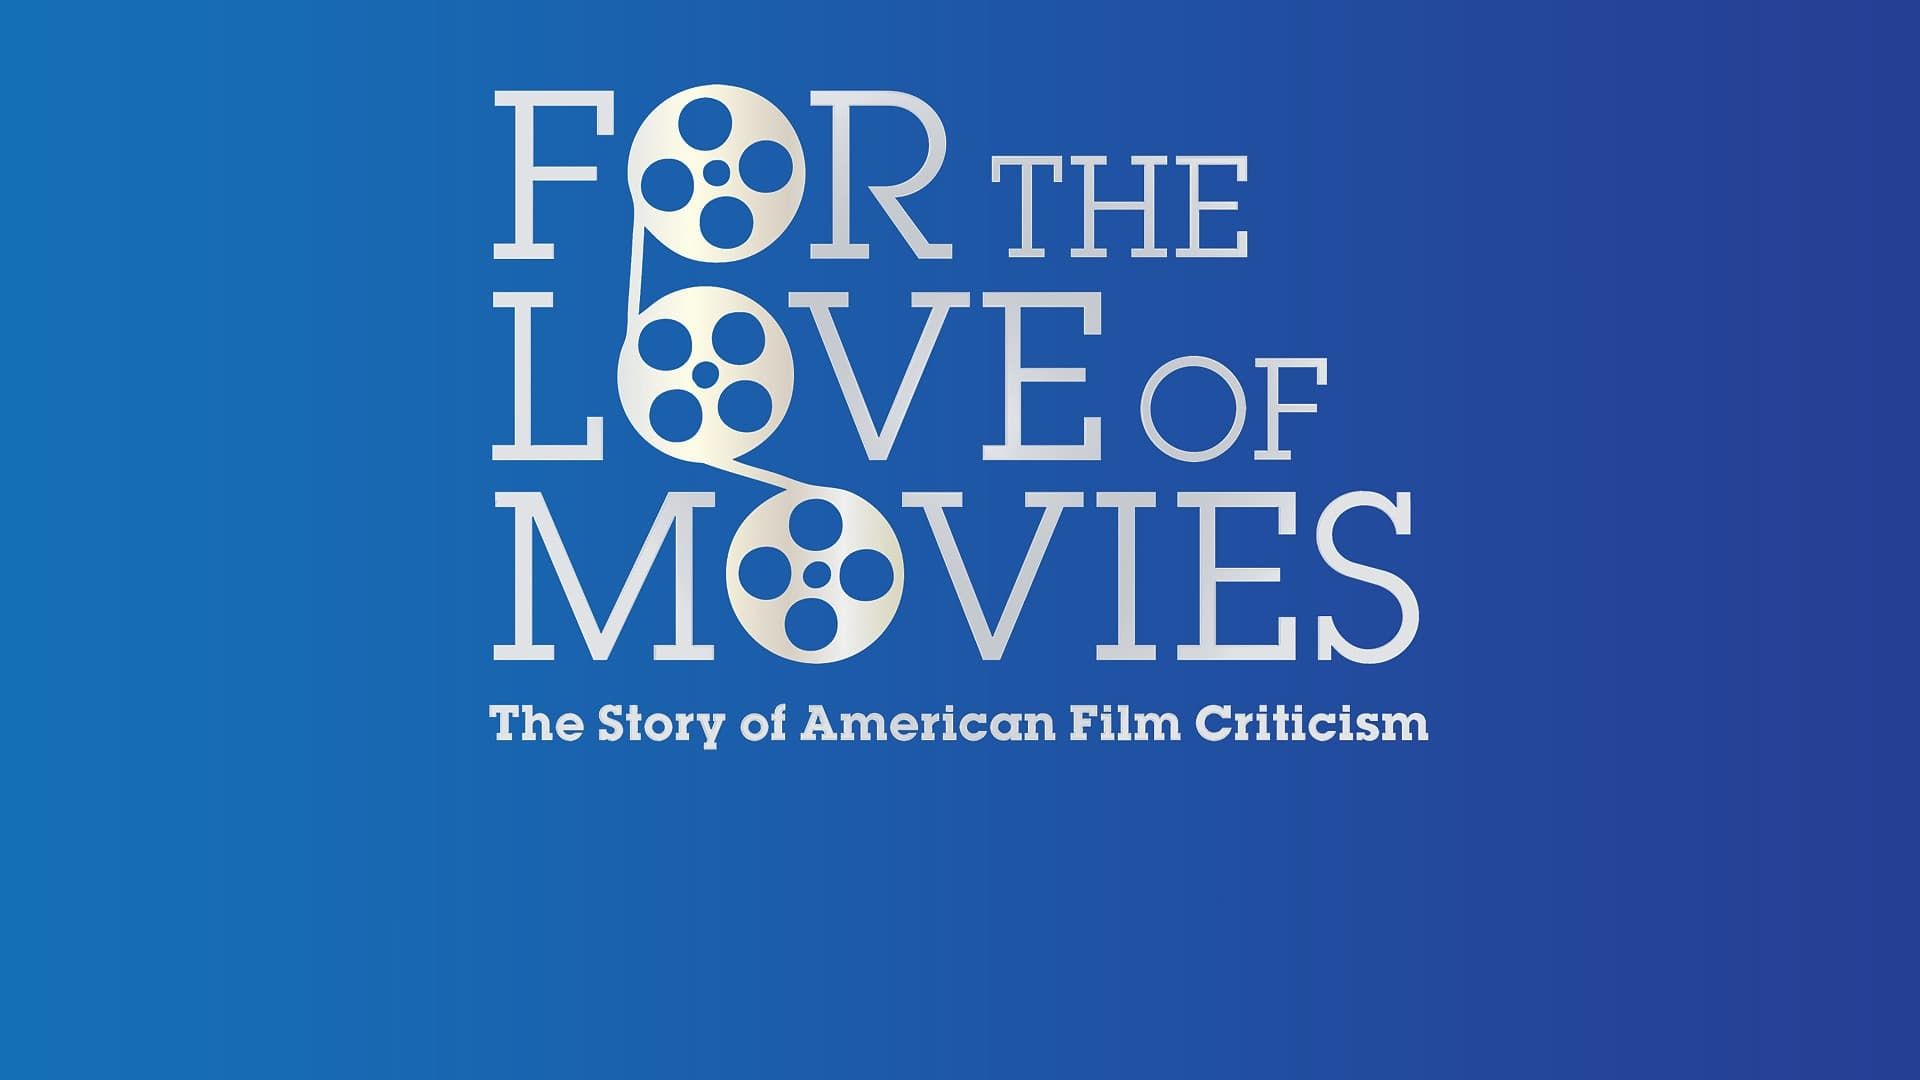 For the Love of Movies: The Story of American Film Criticism background